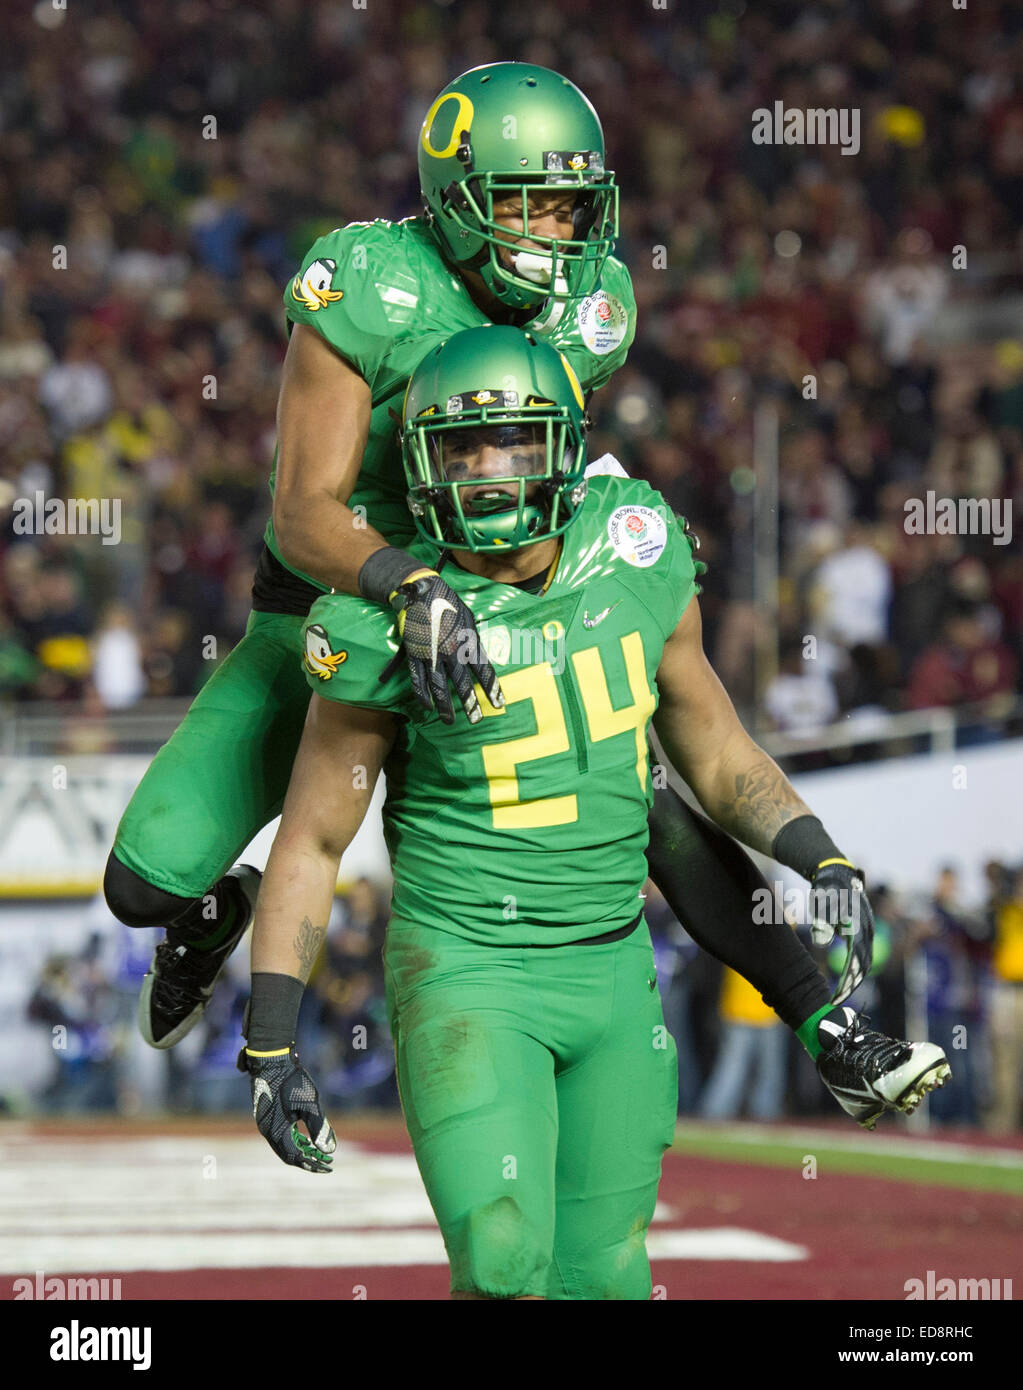 Los Angeles, USA. 1st Jan, 2015. Thomas Tyner (bottom) of the Oregon Ducks celebrates scoring a touchdown during the 2015 Rose Bowl college football game against the Florida State Seminoles at Rose Bowl in Los Angeles, the United States, Jan. 1, 2015. Oregon Ducks won the game 59-20. Credit:  Yang Lei/Xinhua/Alamy Live News Stock Photo